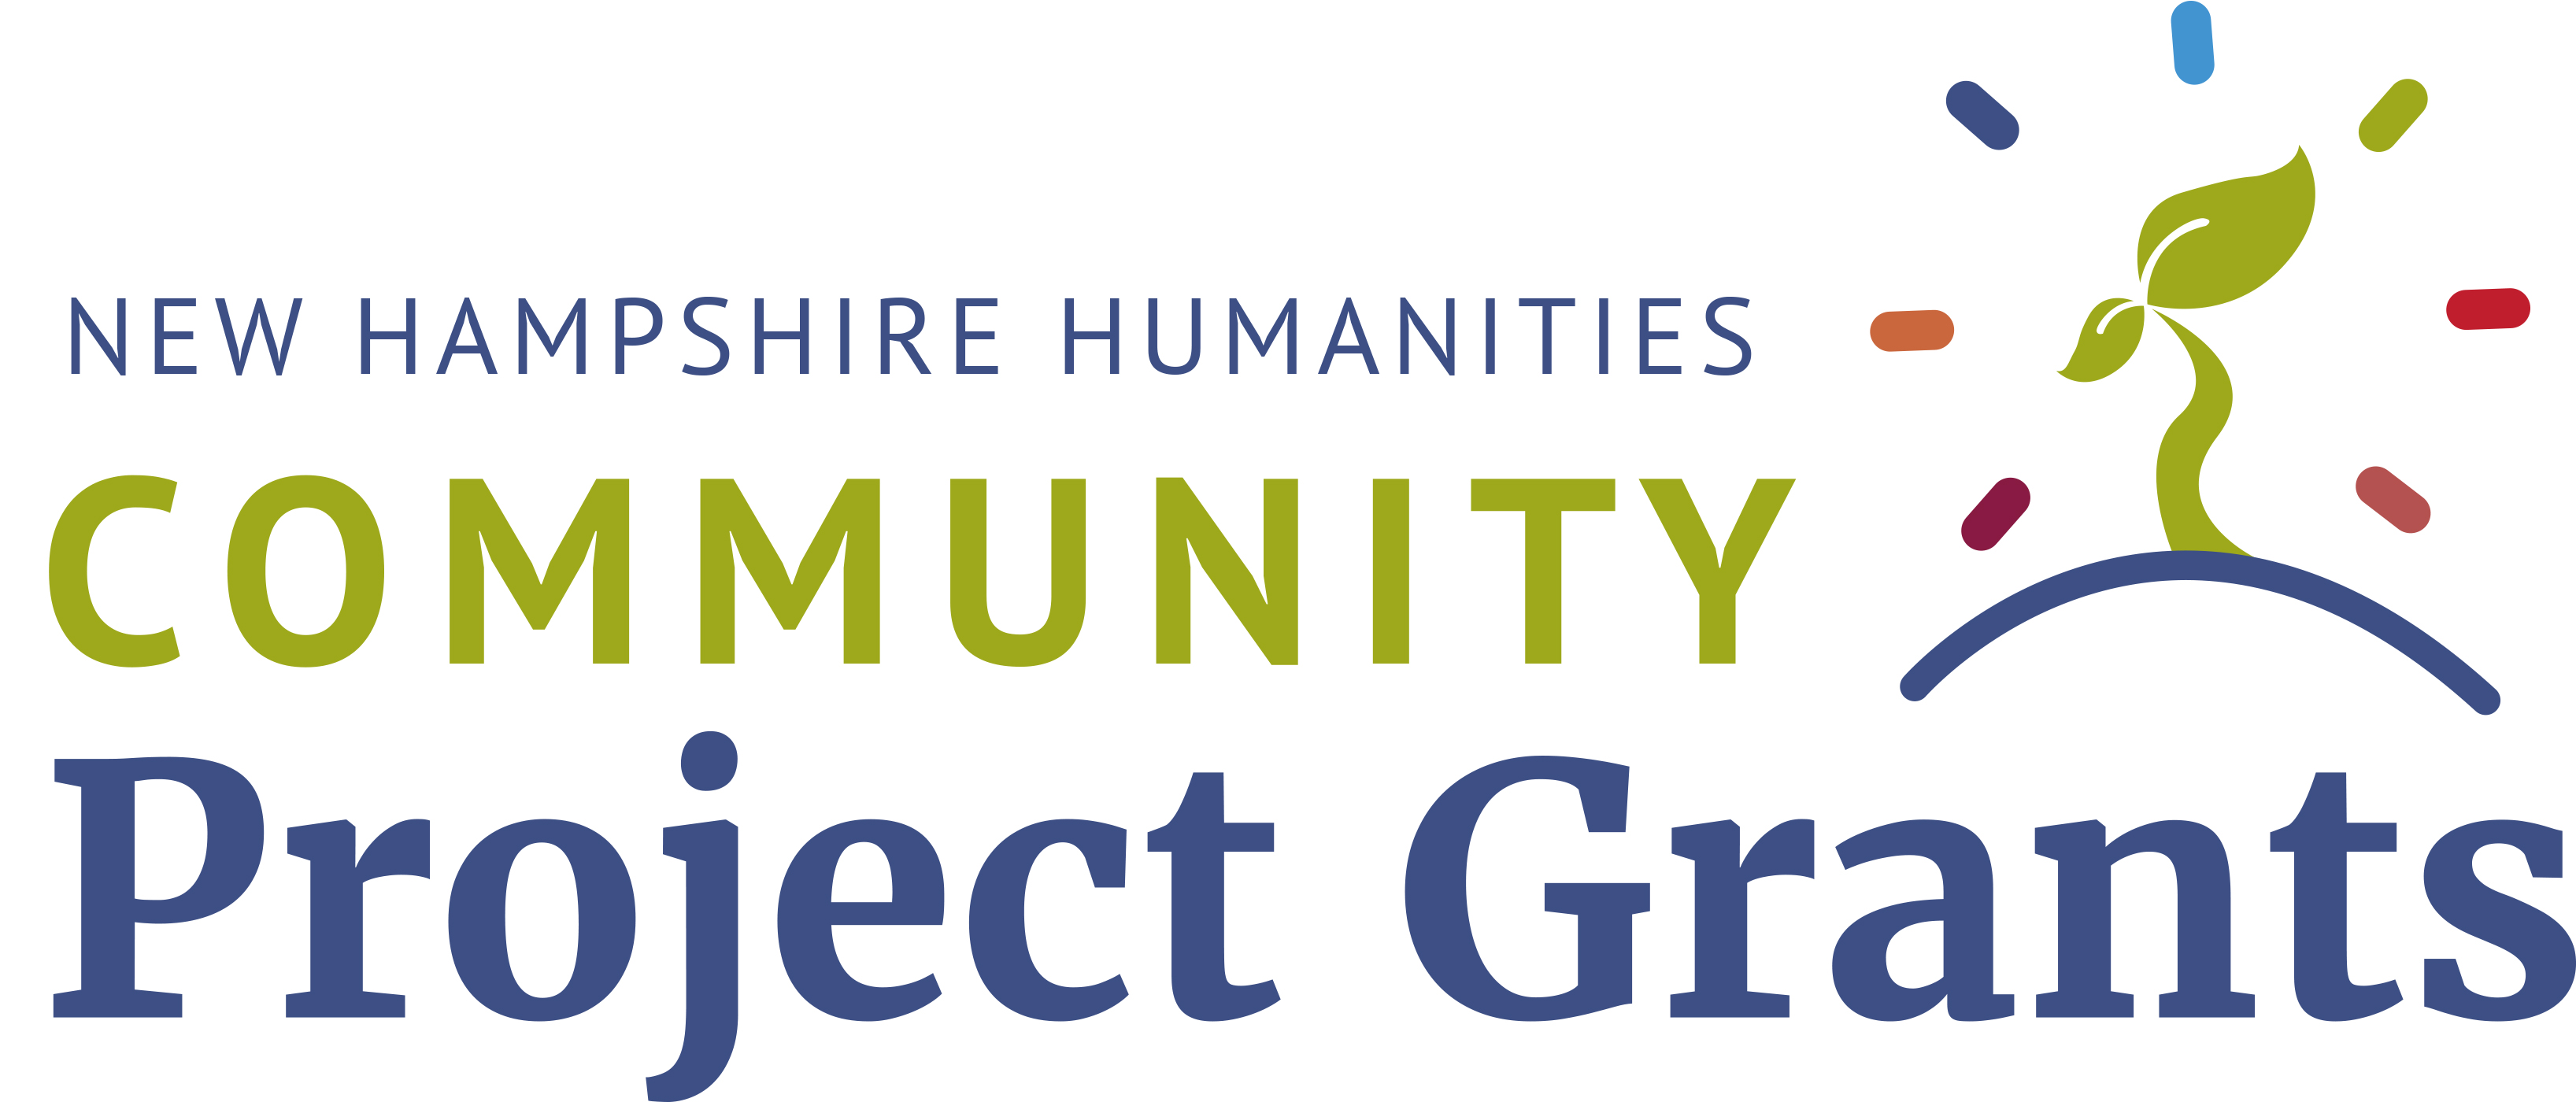 Workshop: Applying for a Community Project Grant